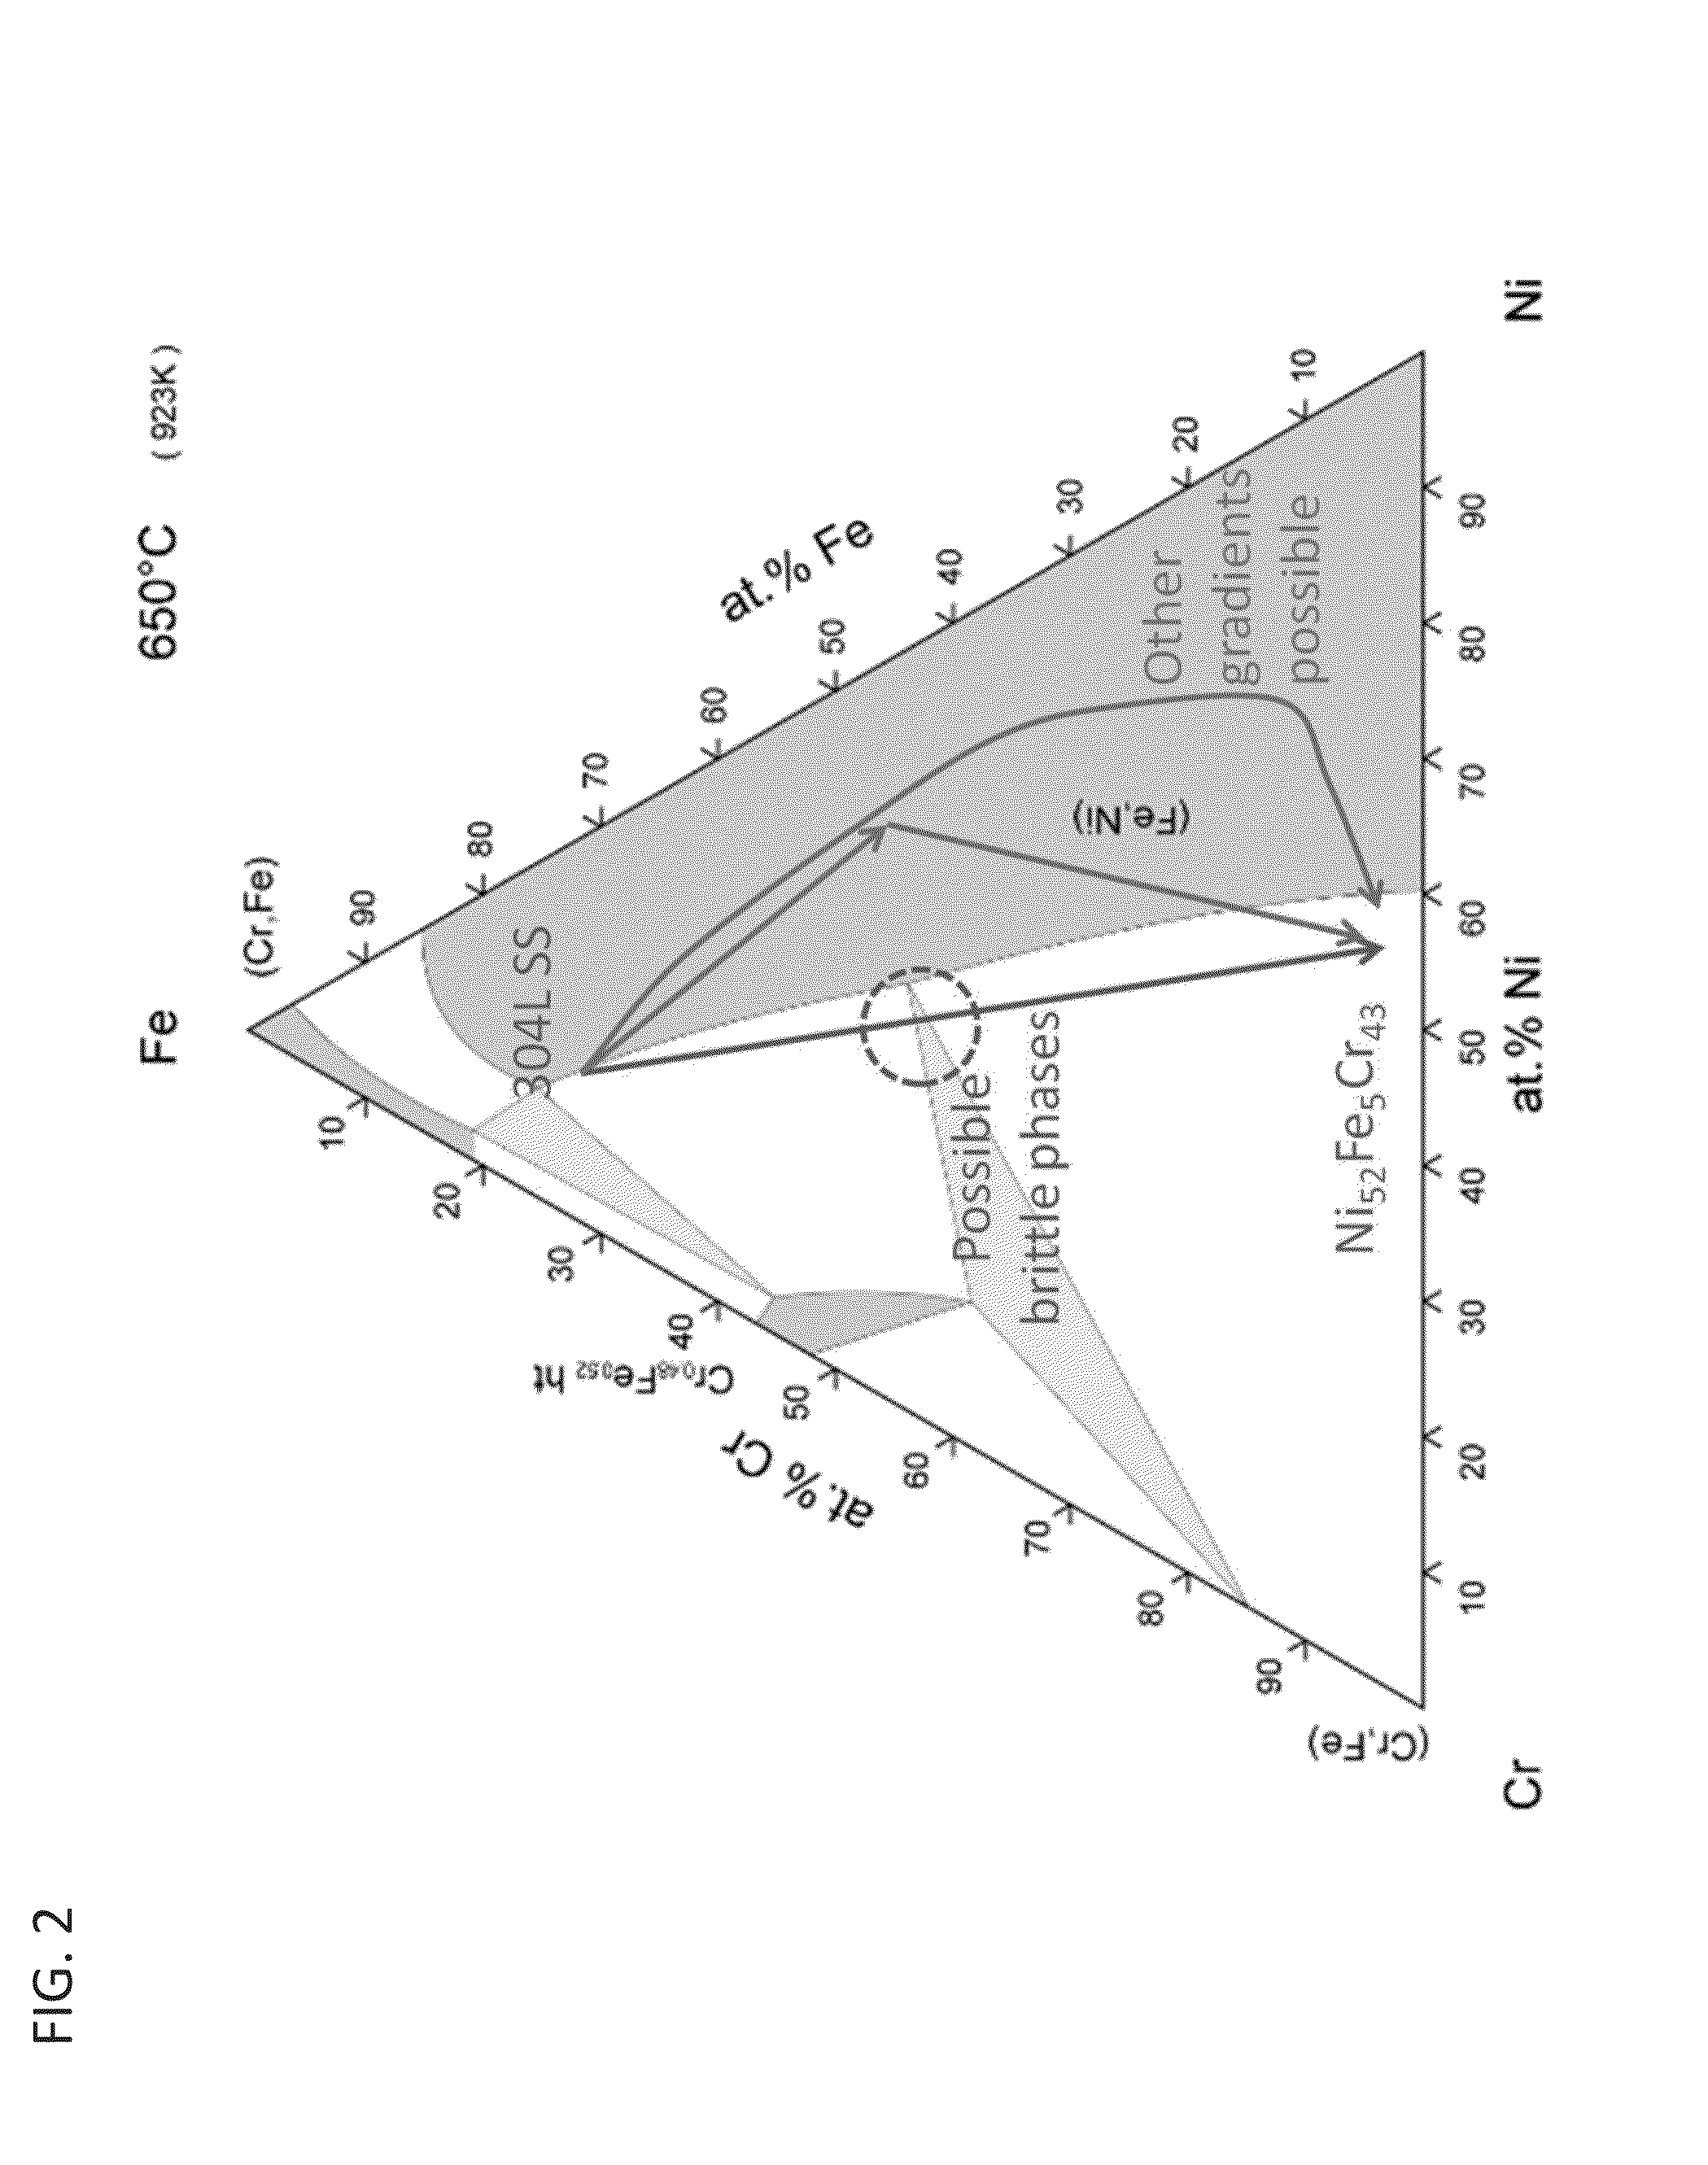 Methods for fabricating gradient alloy articles with multi-functional properties